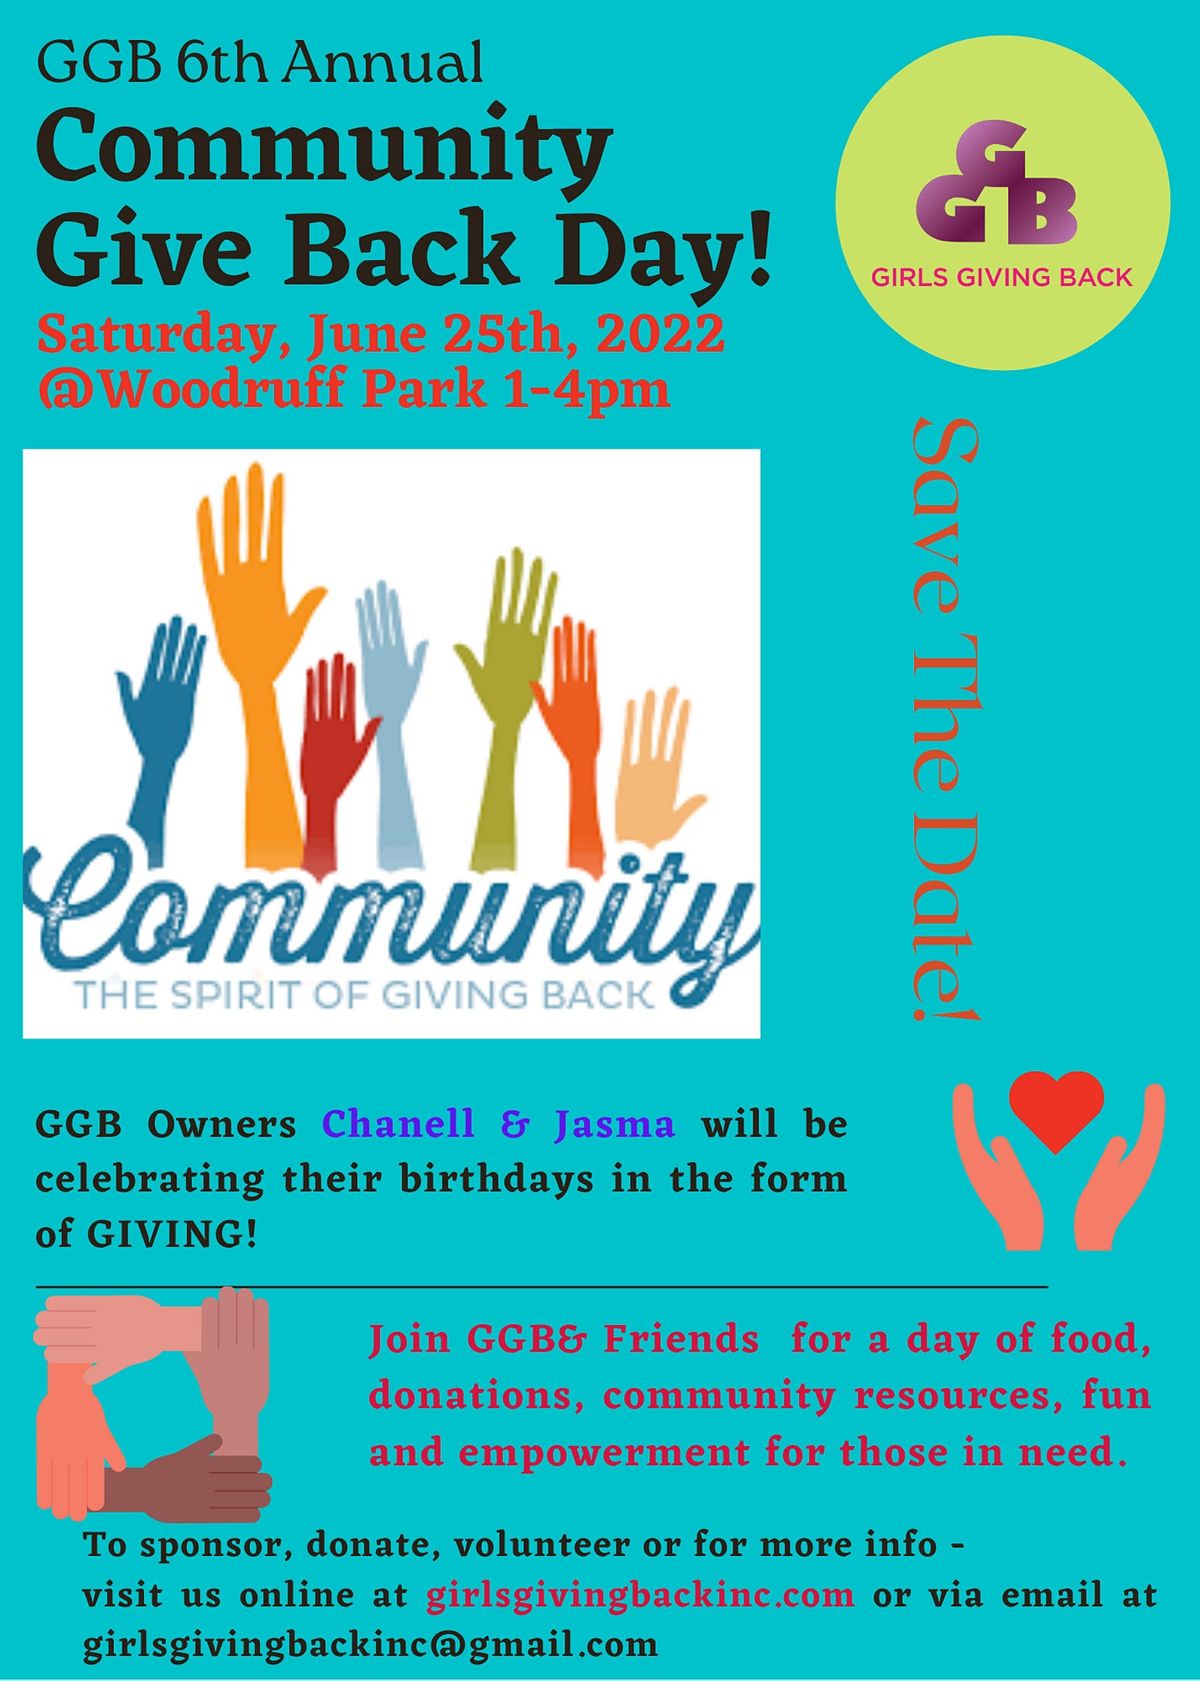 GGB 6th Annual Community Give-Back Day